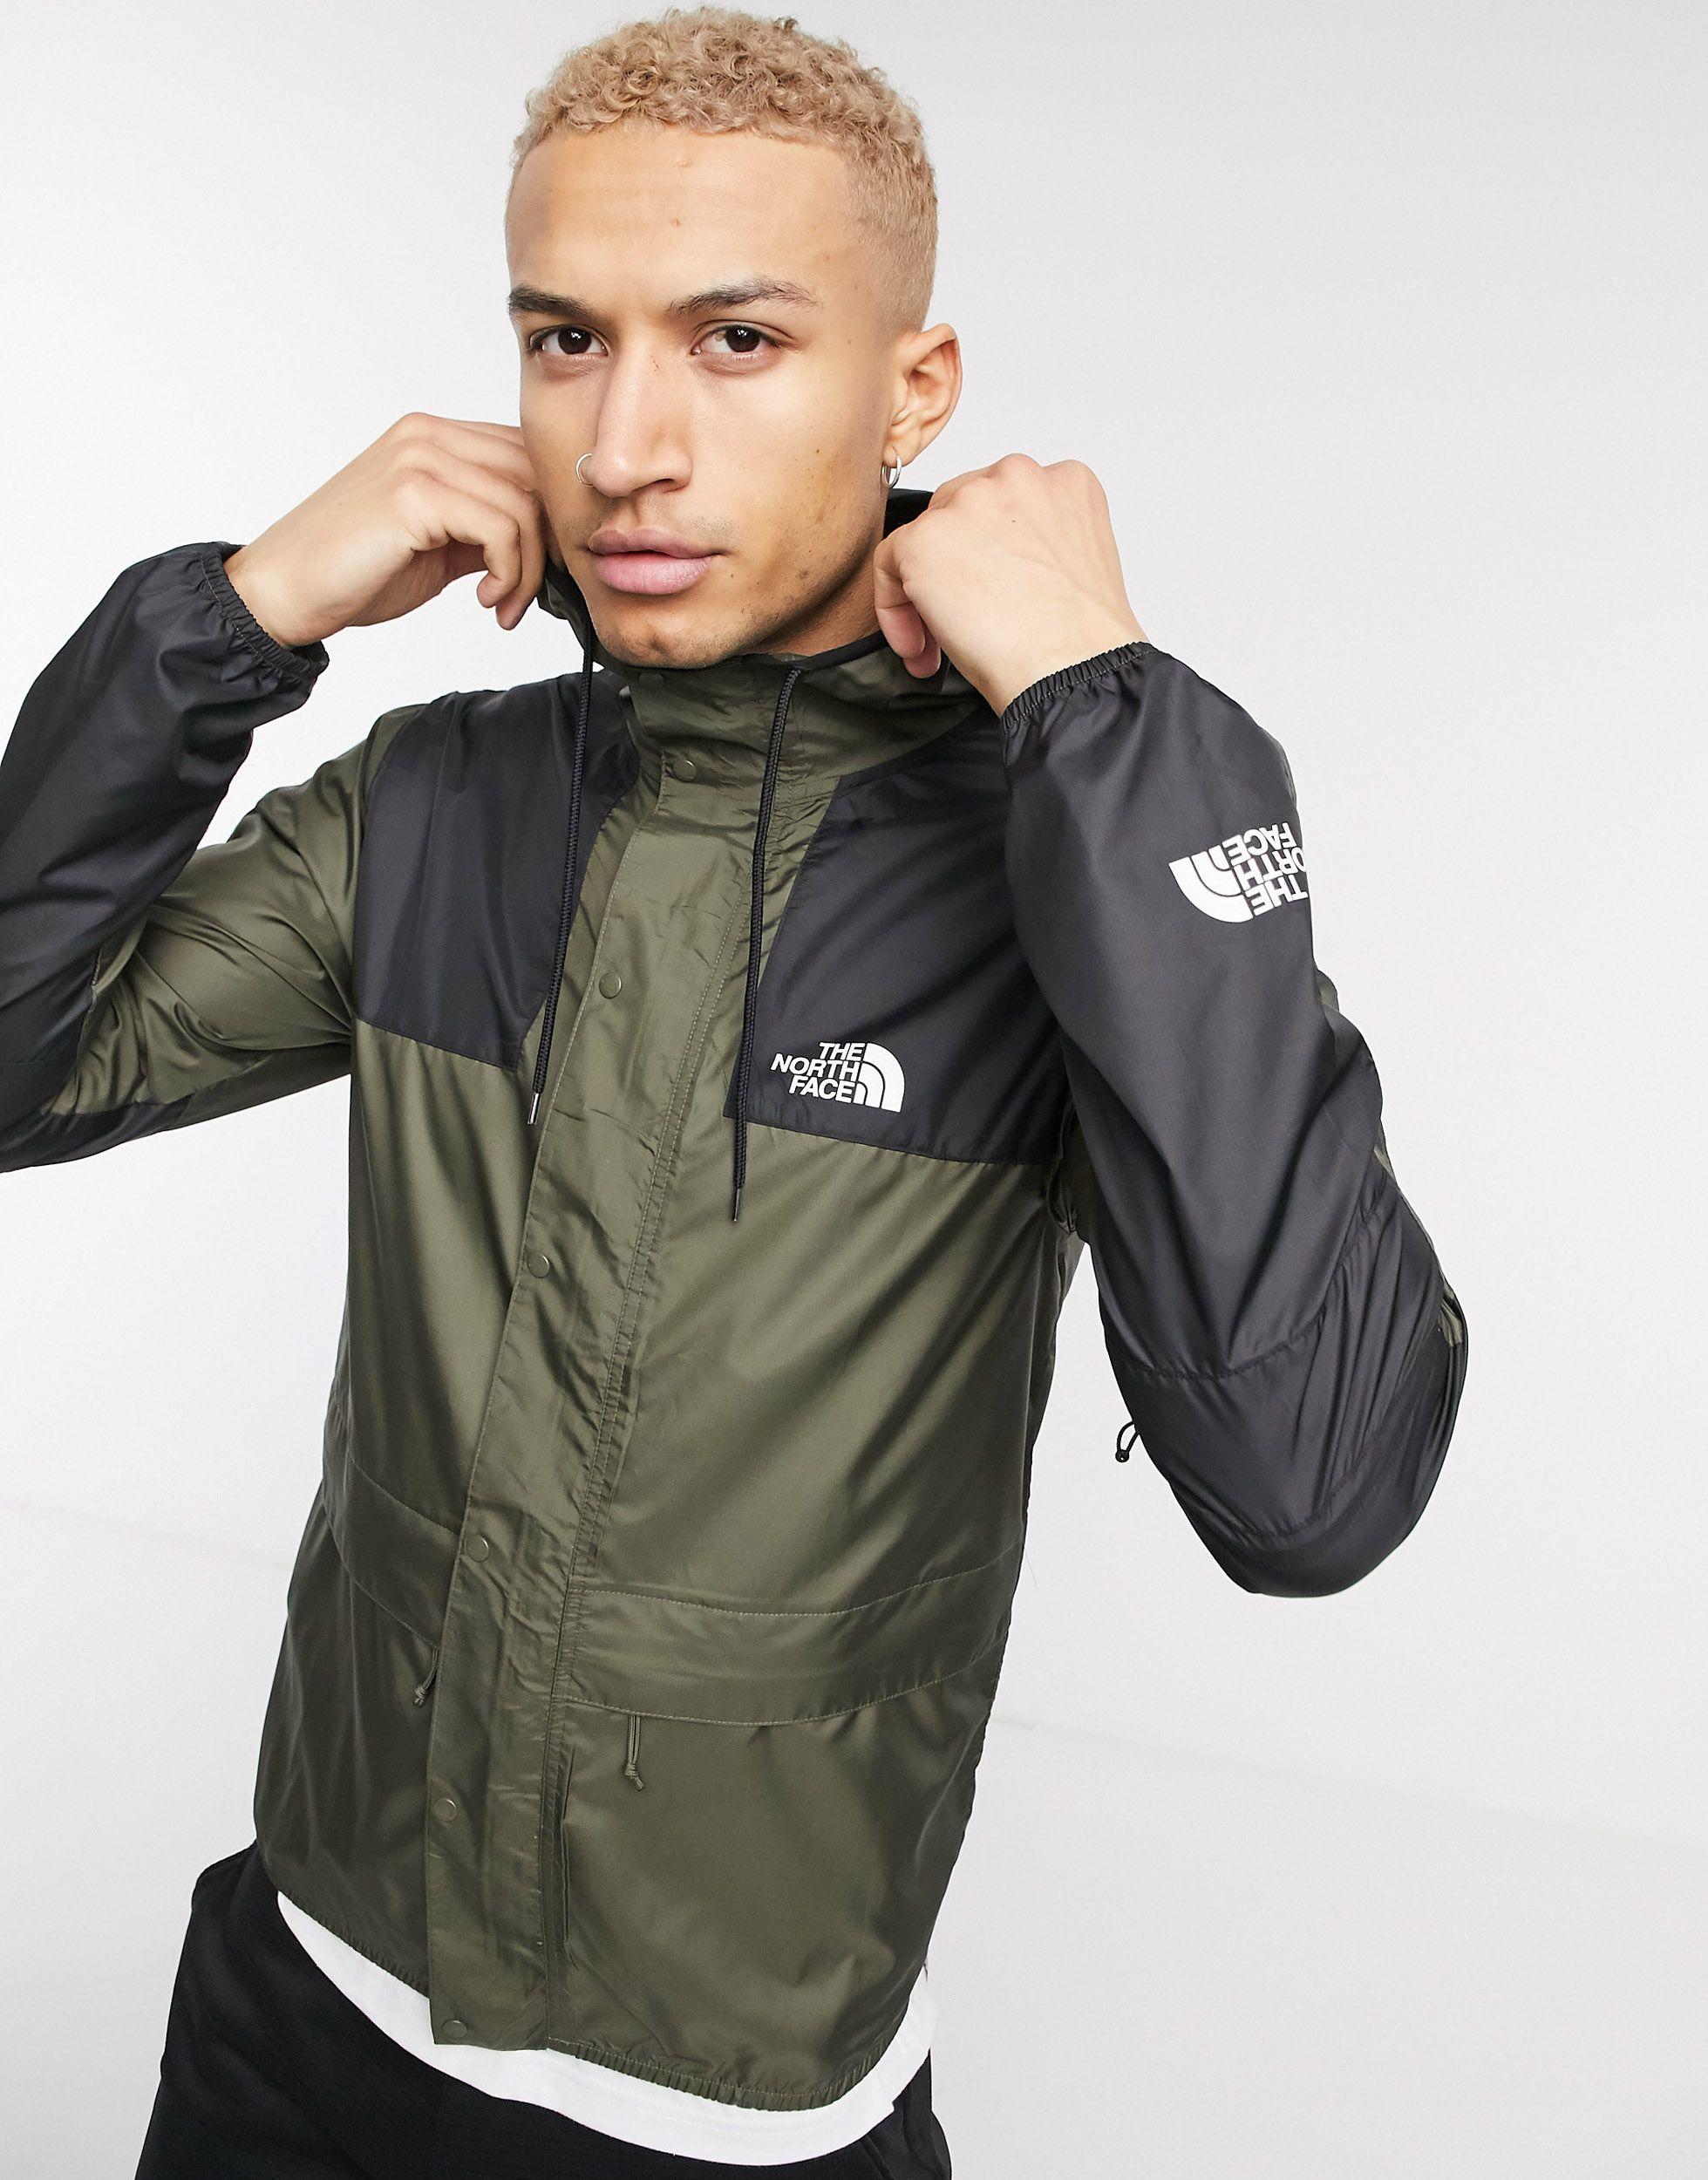 The North Face 1985 Mountain Jacket Discount Buying, Save 40% | jlcatj ...